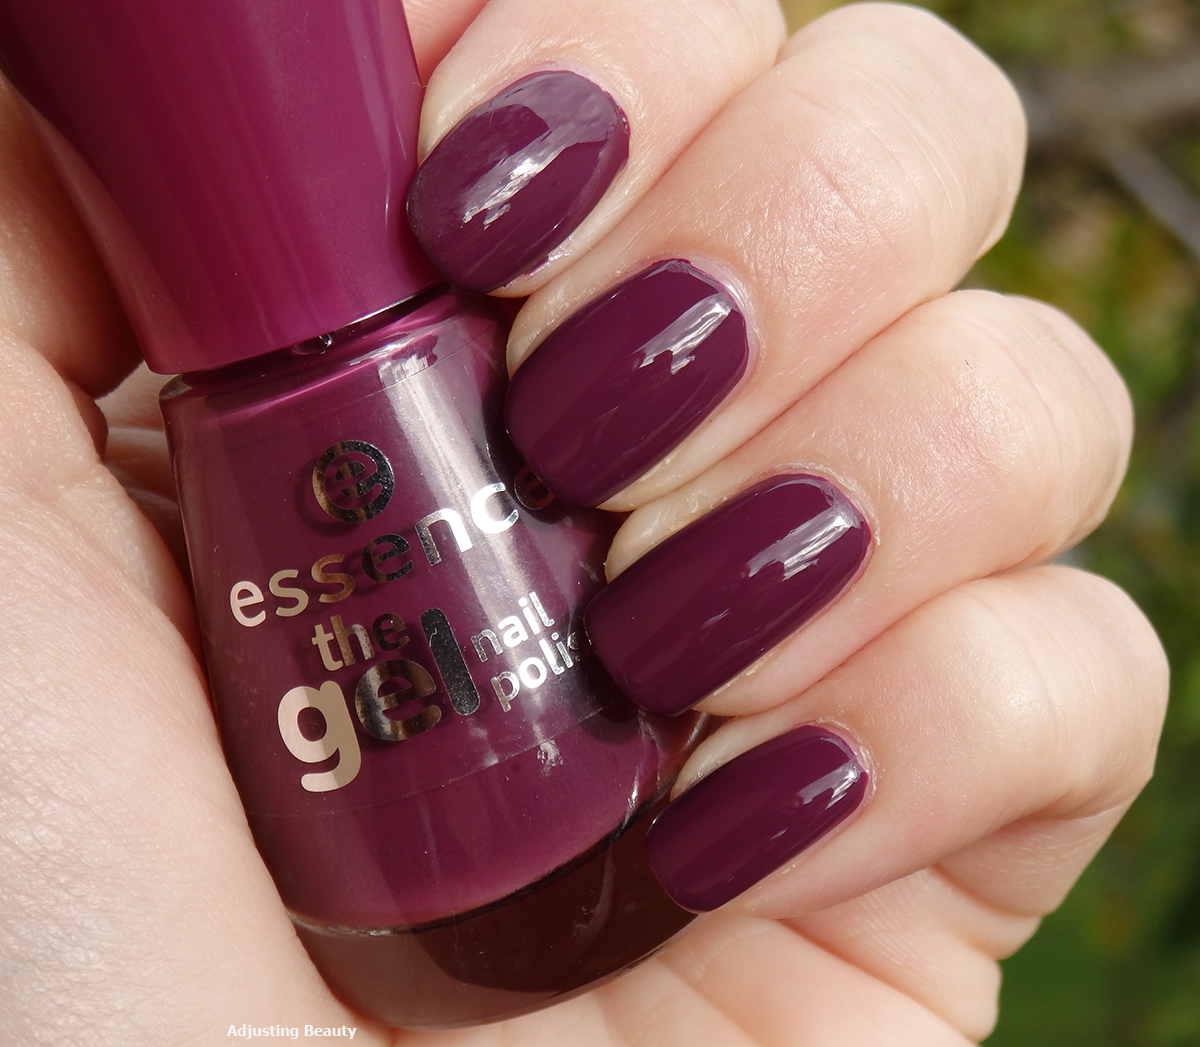 Hey Beauties A Few Weeks Ago I Got This Beautiful Autumnal Plum Nail Polish It Was A Gift By Lovely T Nail Polish Essence Nail Polish Essence Gel Nail Polish